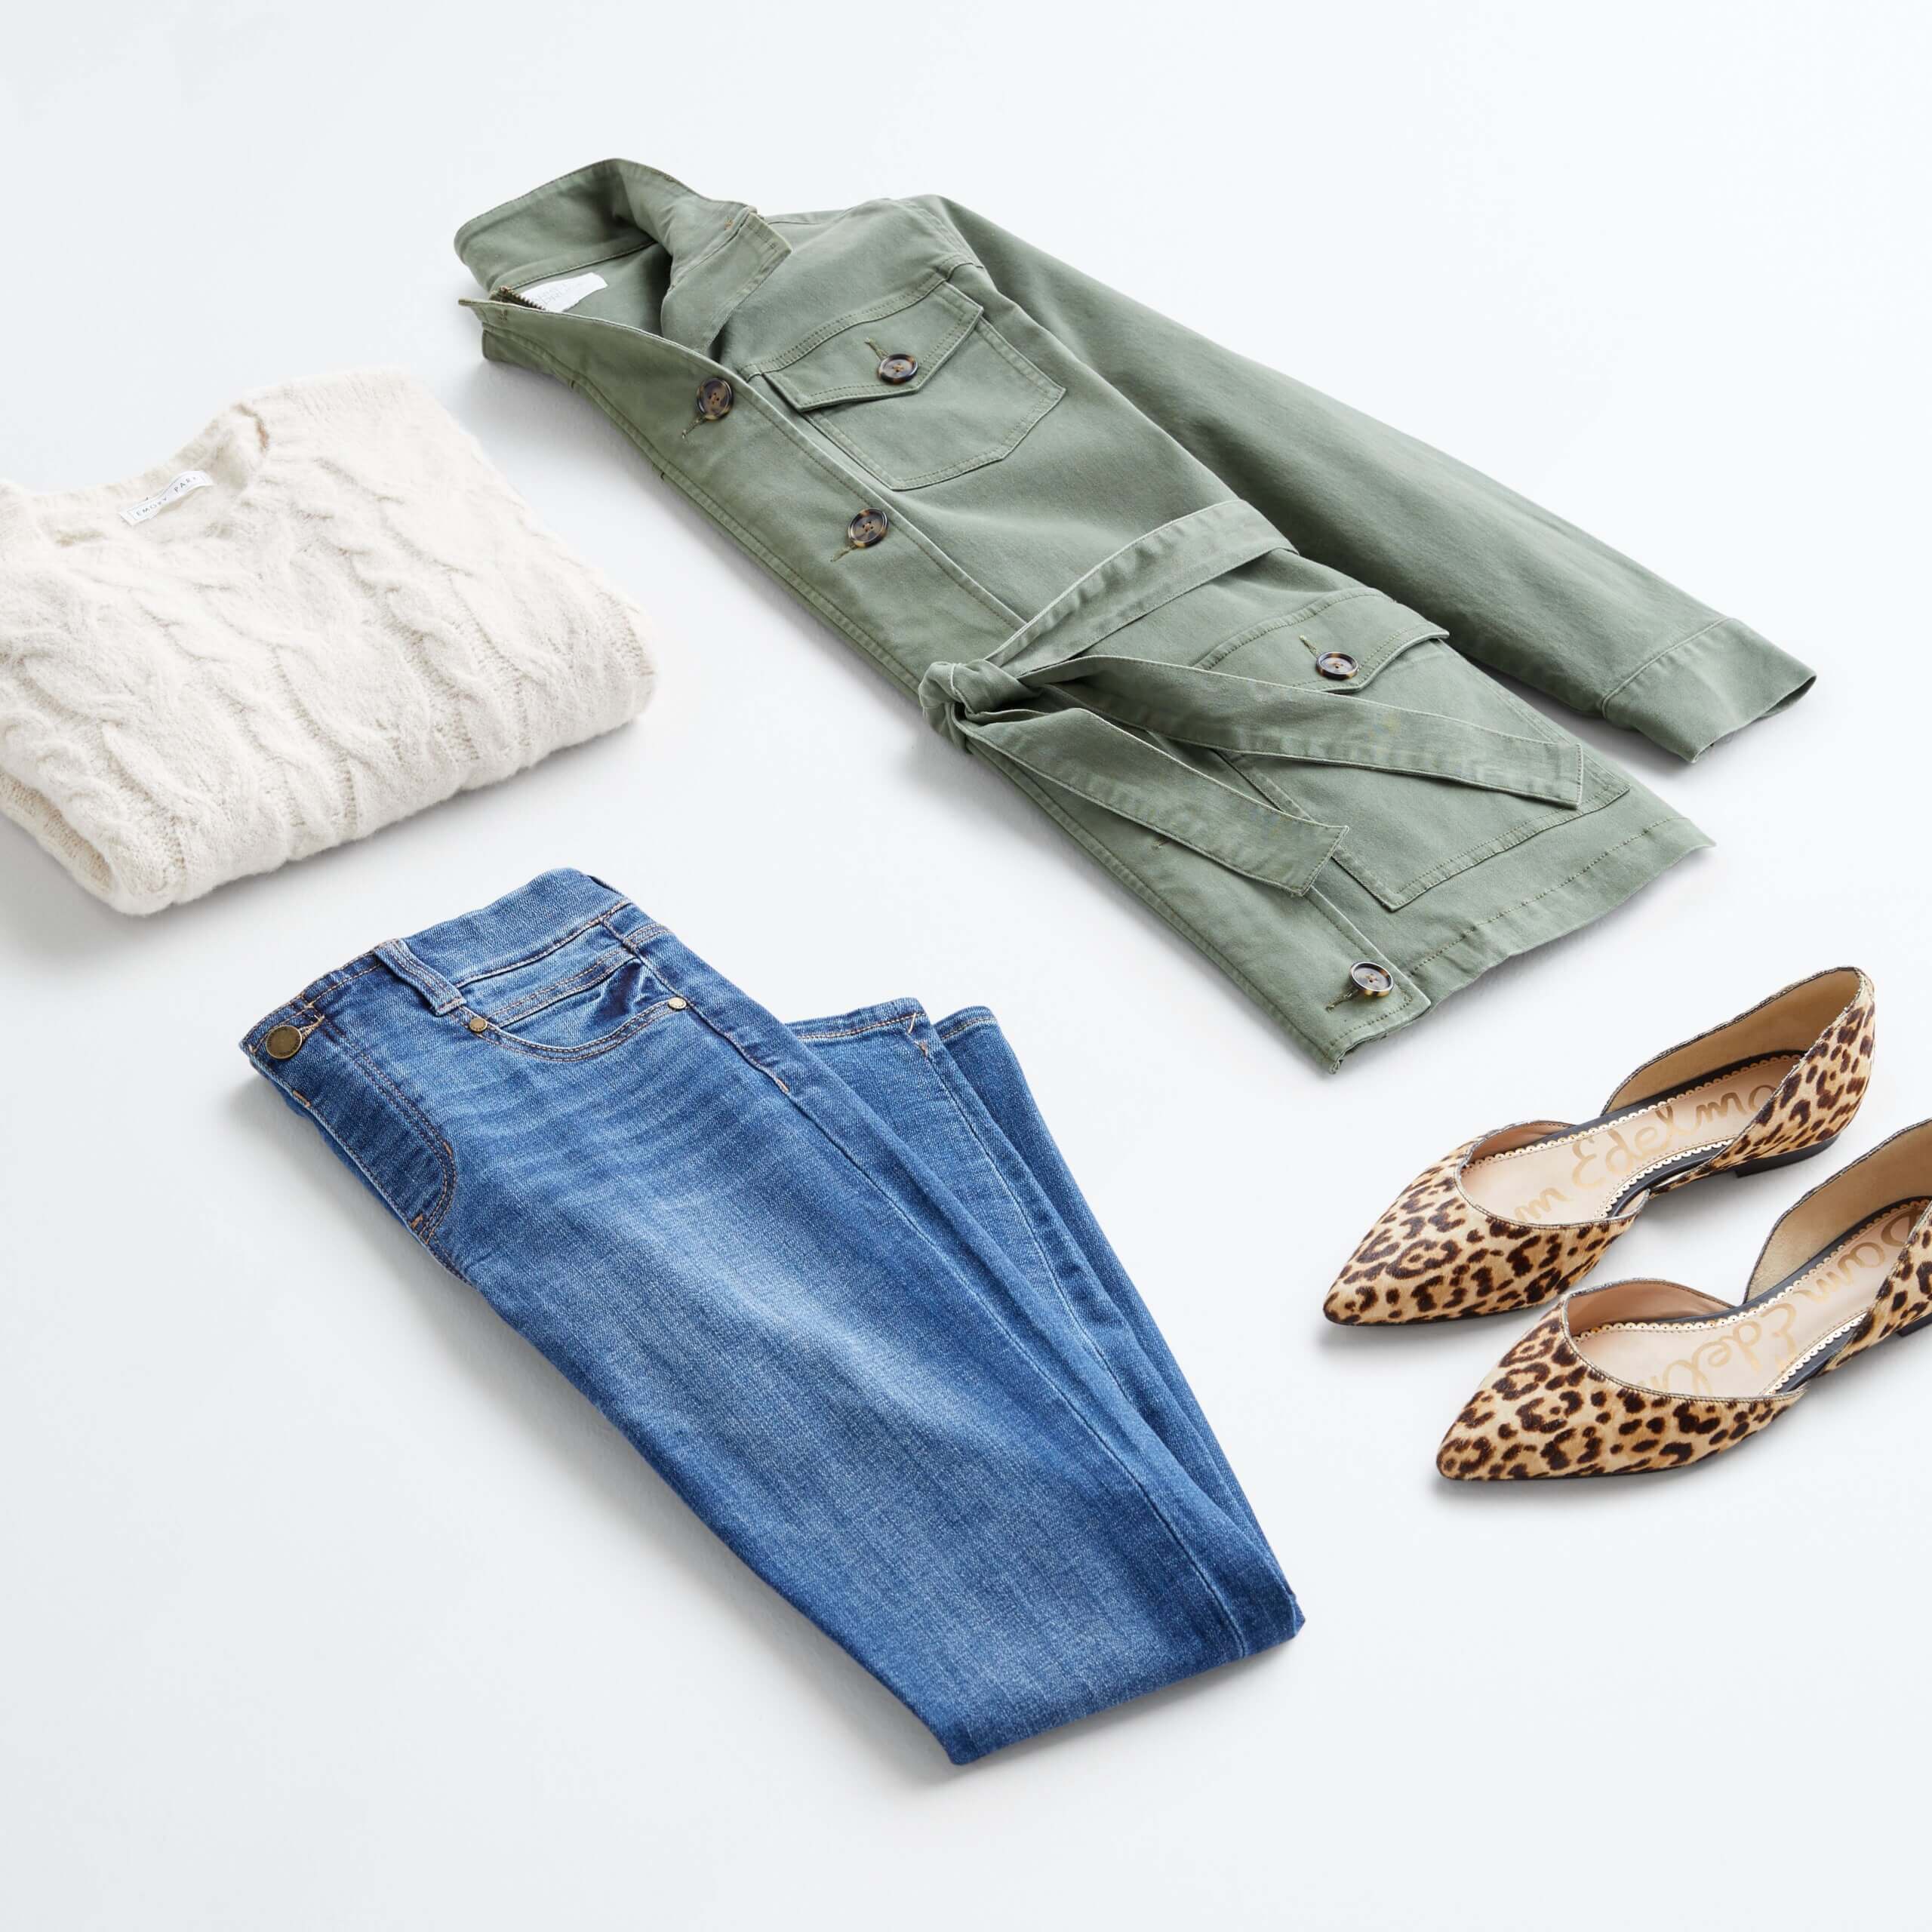 Stitch Fix Women's outfit laydown featuring cream cable knit pullover, green cargo jacket, blue jeans and cheetah print flats. 